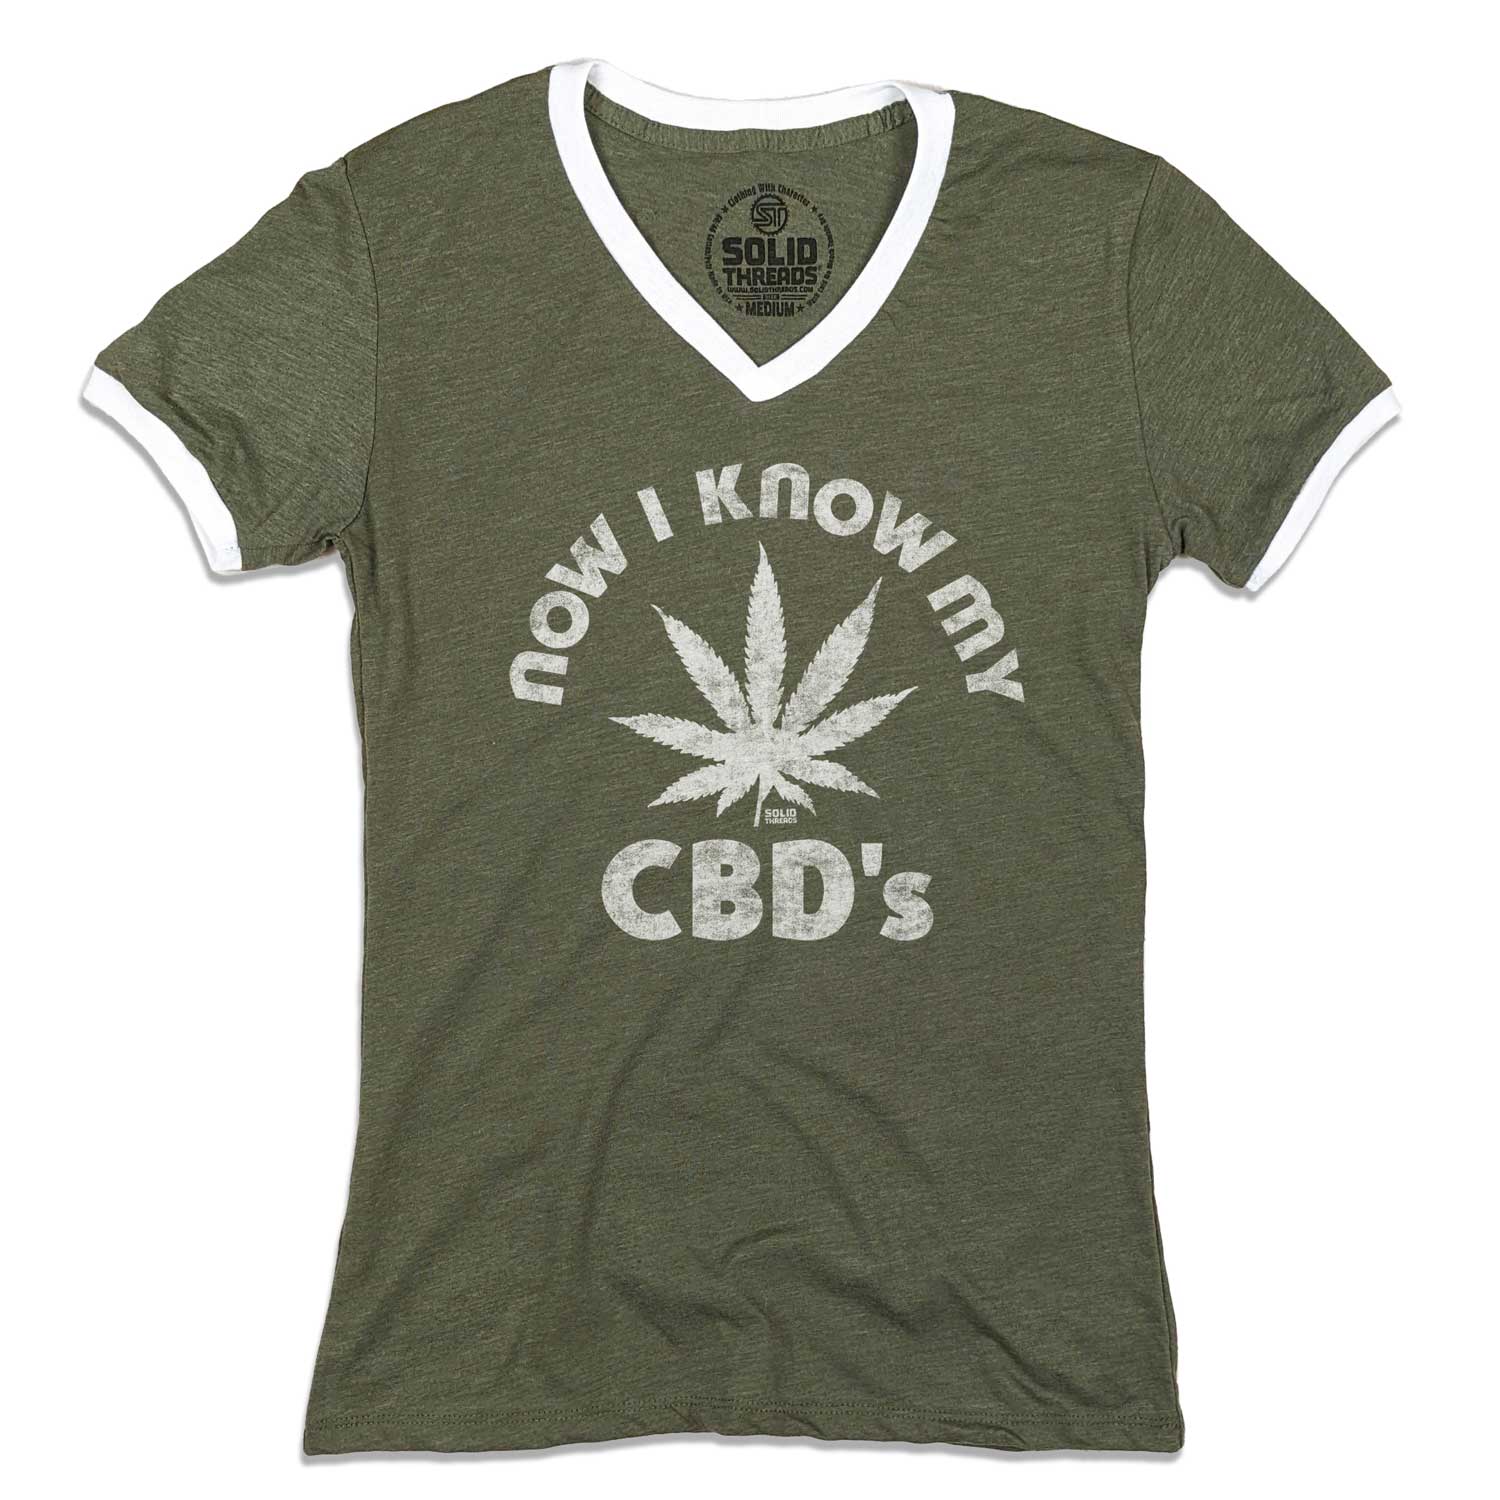 Women's Now I Know My CBD's Vintage Graphic V-Neck Tee | Funny Cannabis T-shirt | Solid Threads